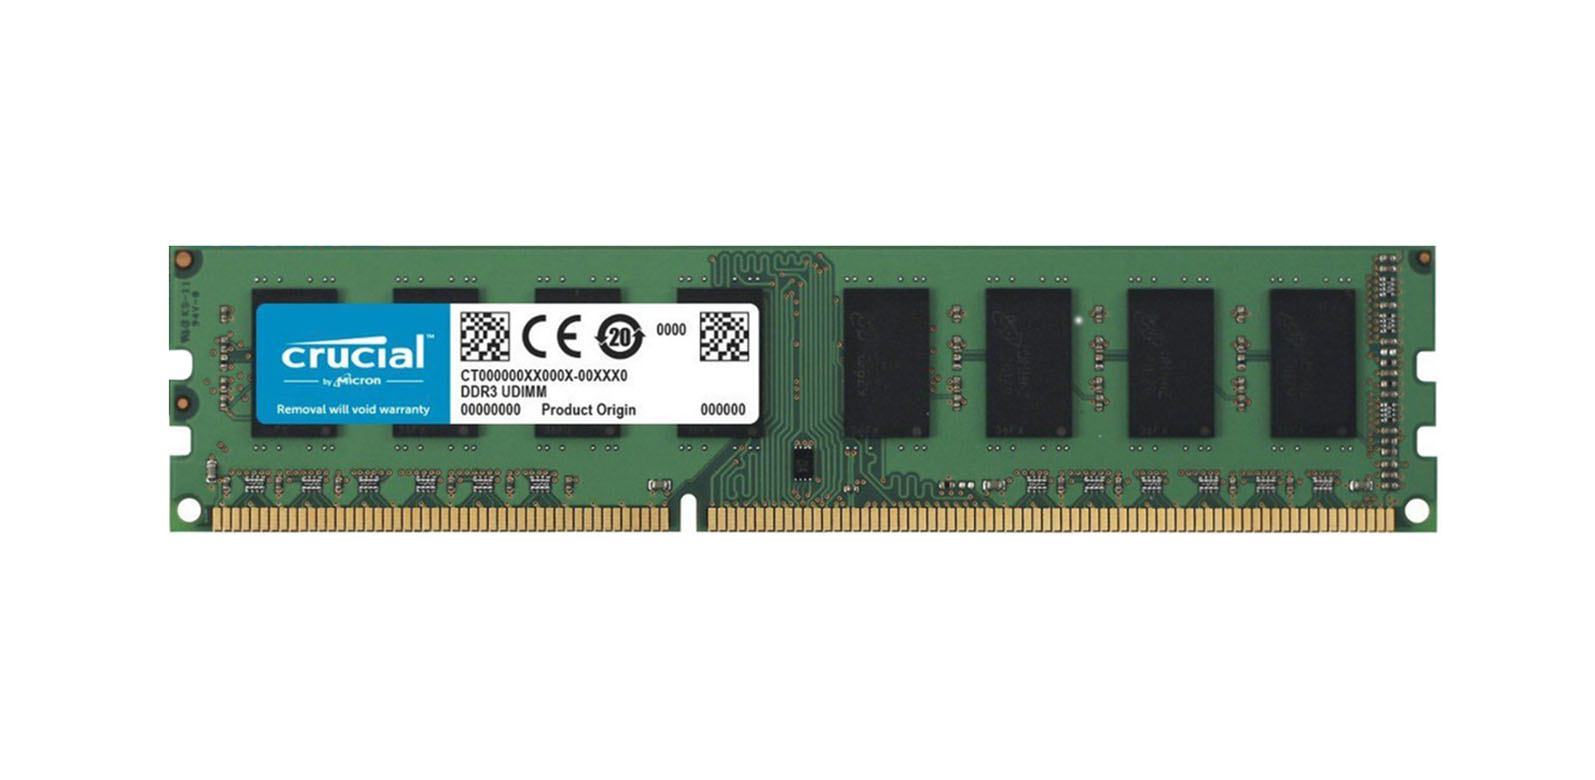 Crucial CT5318726 8GB DDR3-1600MHz PC3-12800 ECC Registered CL11 240-Pin DIMM 1.35V Low Voltage Dual Rank Very Low Profile (VLP) Memory Module Upgrade for HP - Compaq ProLiant SL170z G6